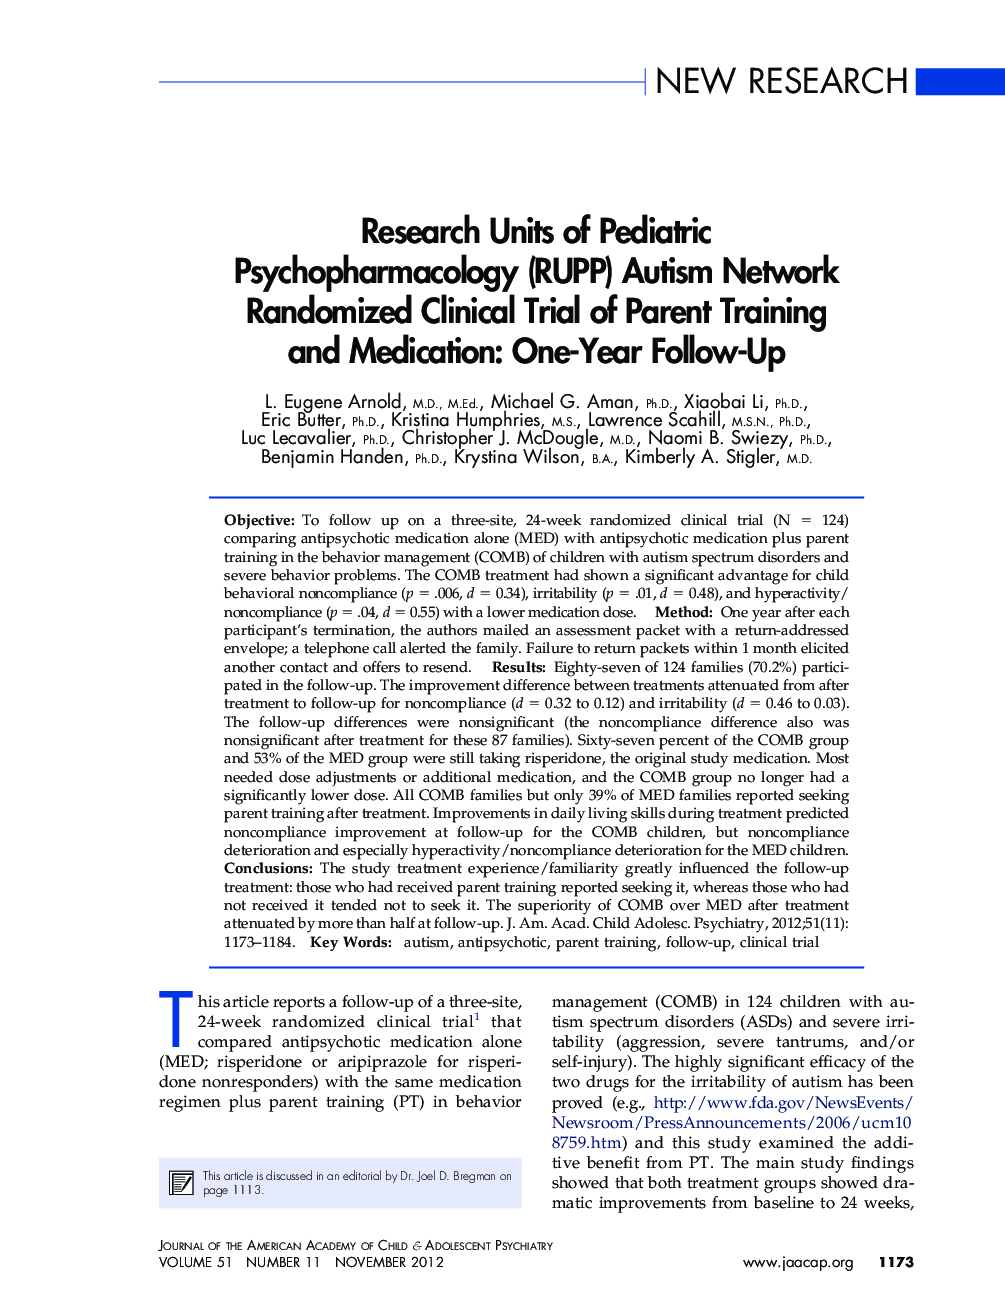 Research Units of Pediatric Psychopharmacology (RUPP) Autism Network Randomized Clinical Trial of Parent Training and Medication: One-Year Follow-Up 